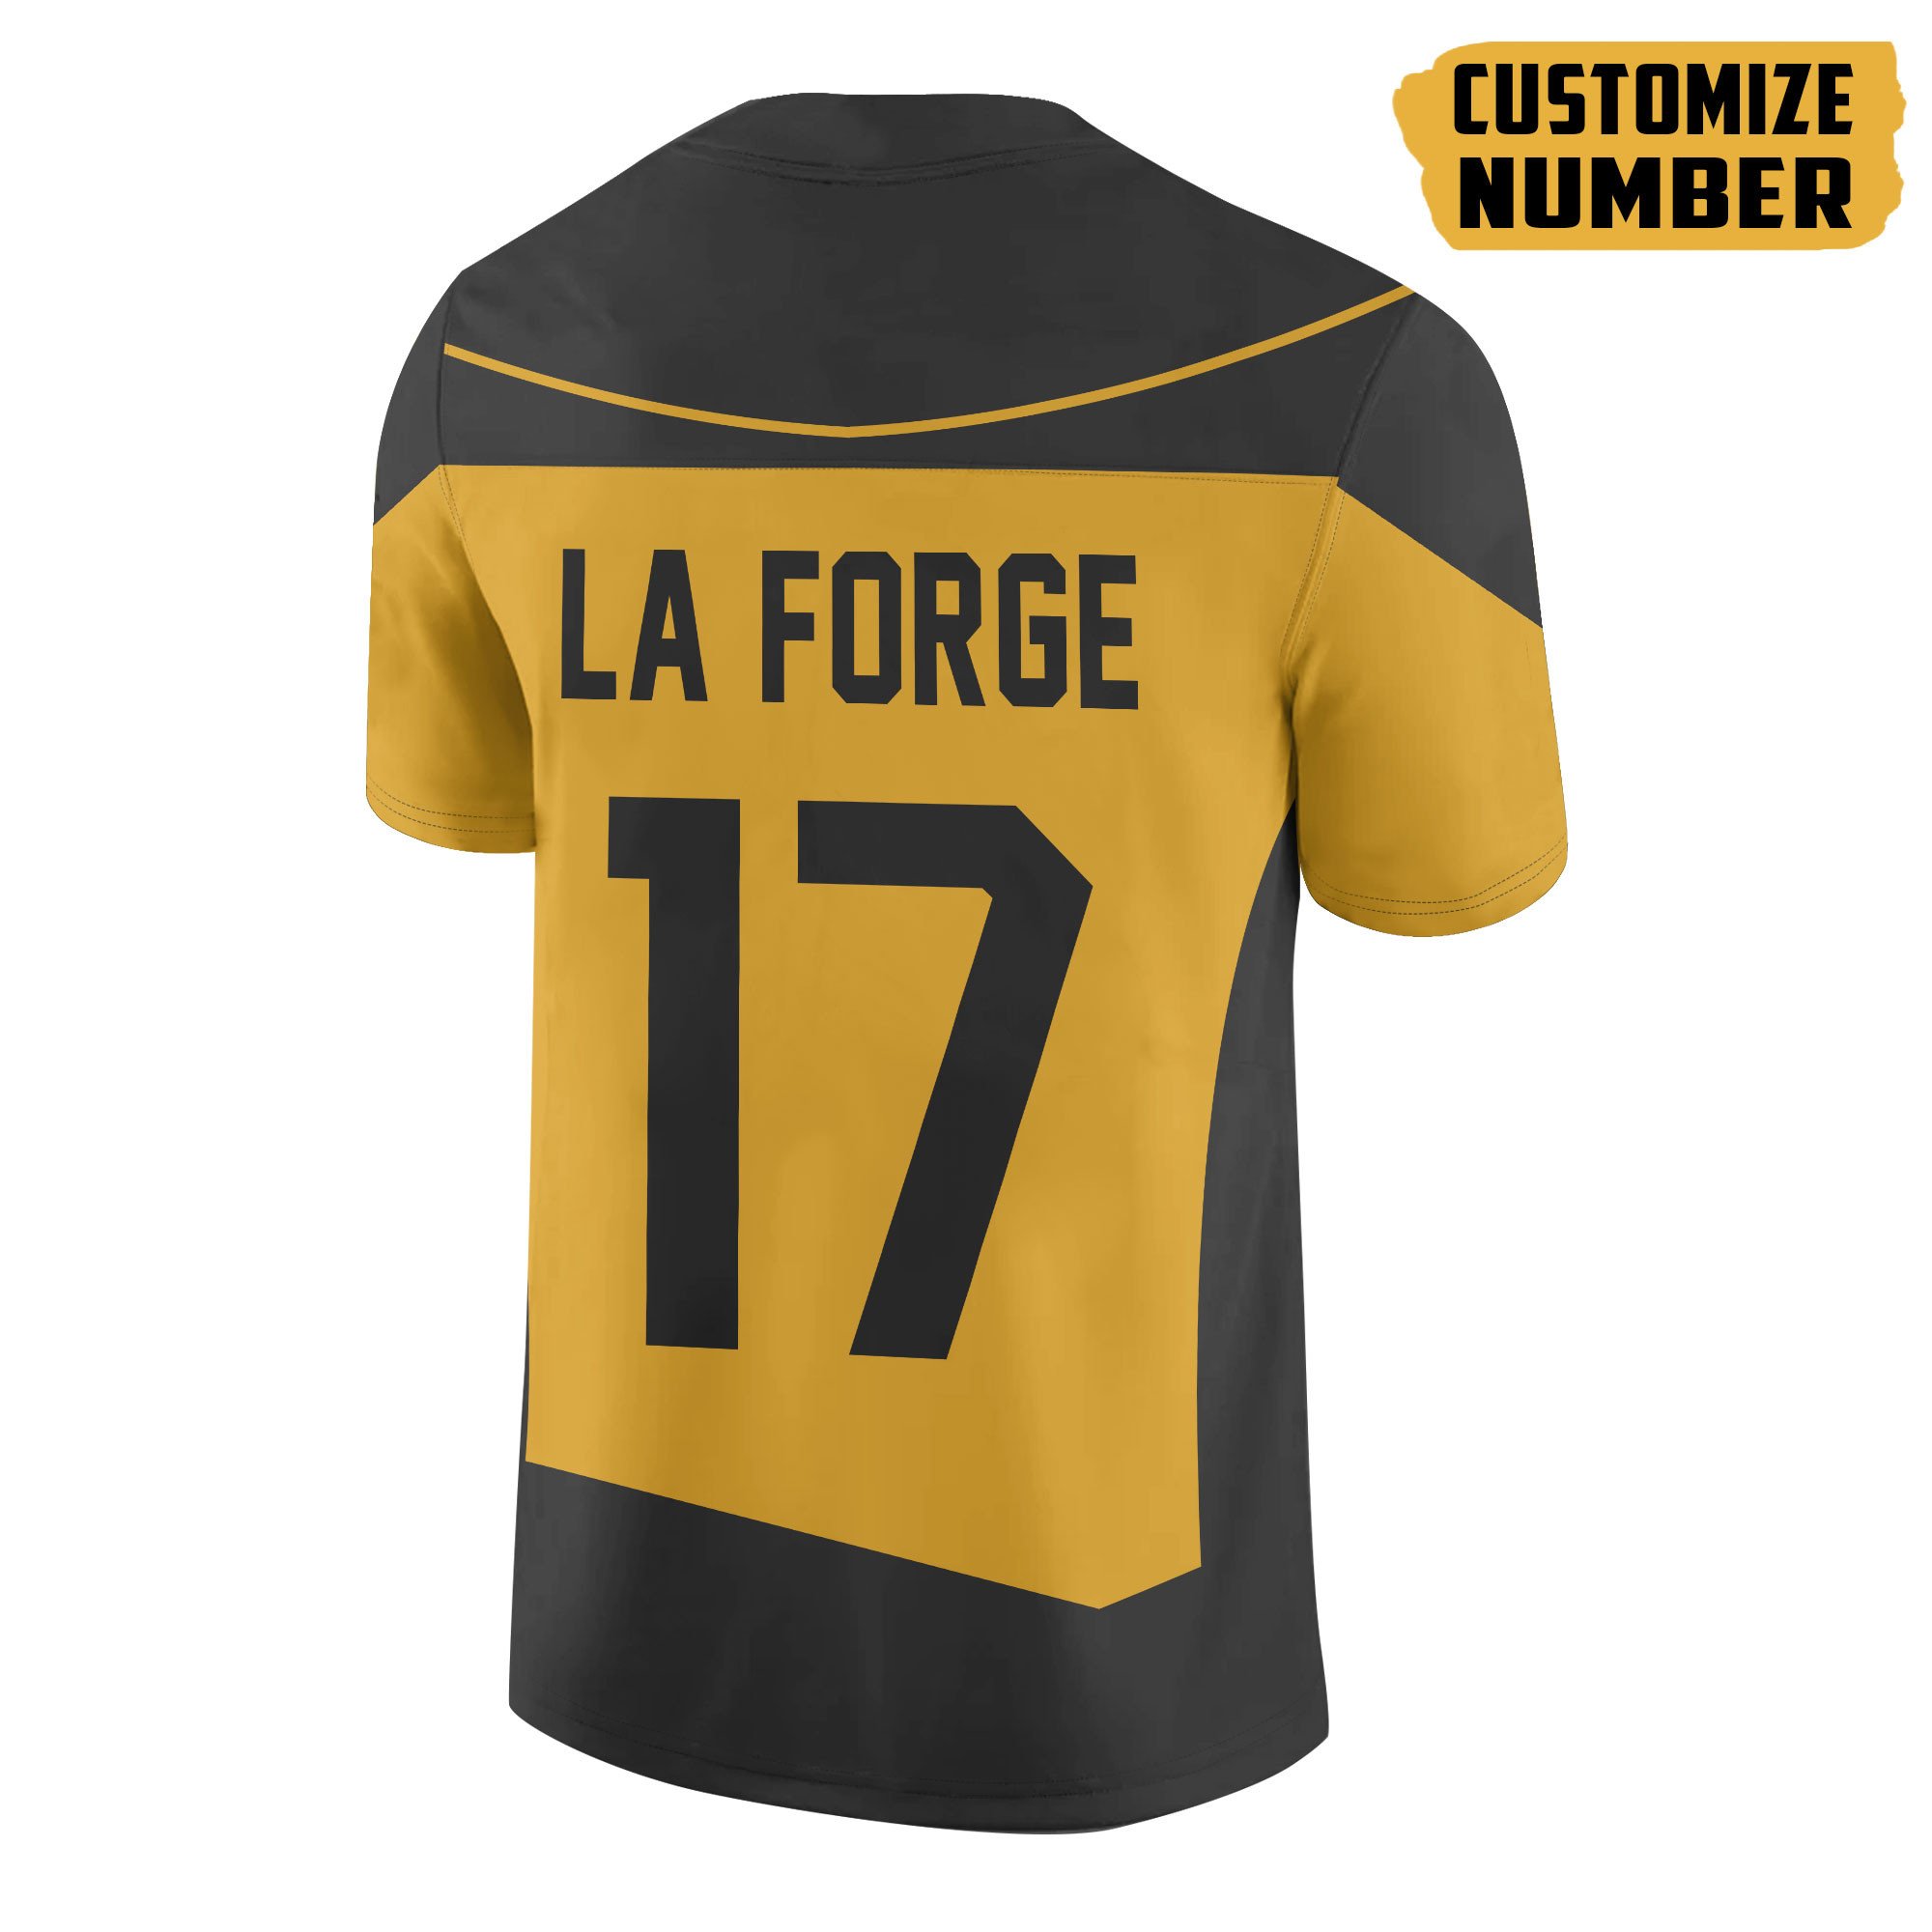 TOP S.T The Next Generation Yellow Version Personalized Custom Football All Over Print Jersey 2